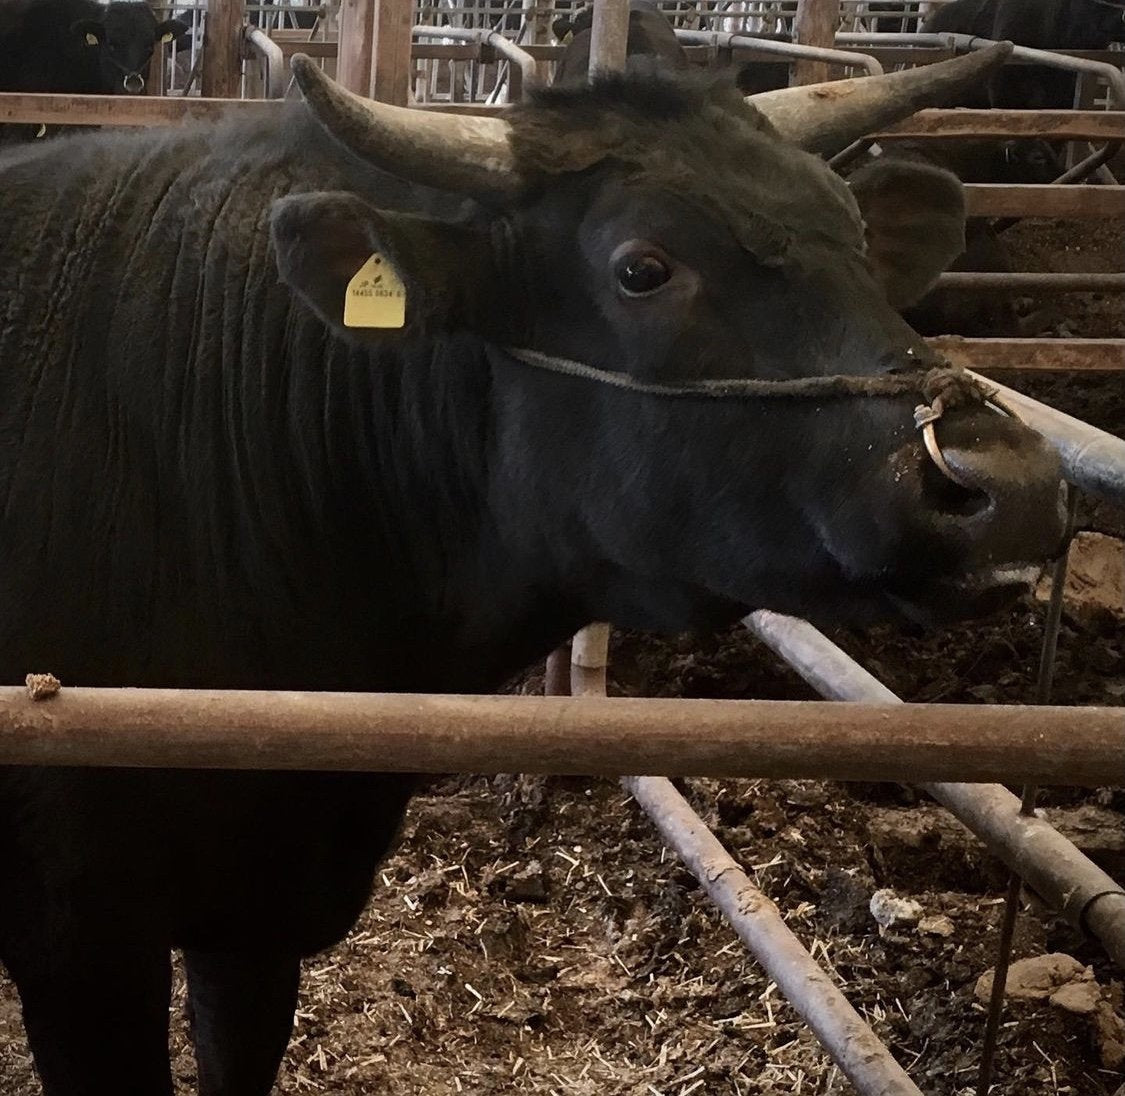 The Cow Behind the Cuts: Japanese Wagyu Cattle Breeds